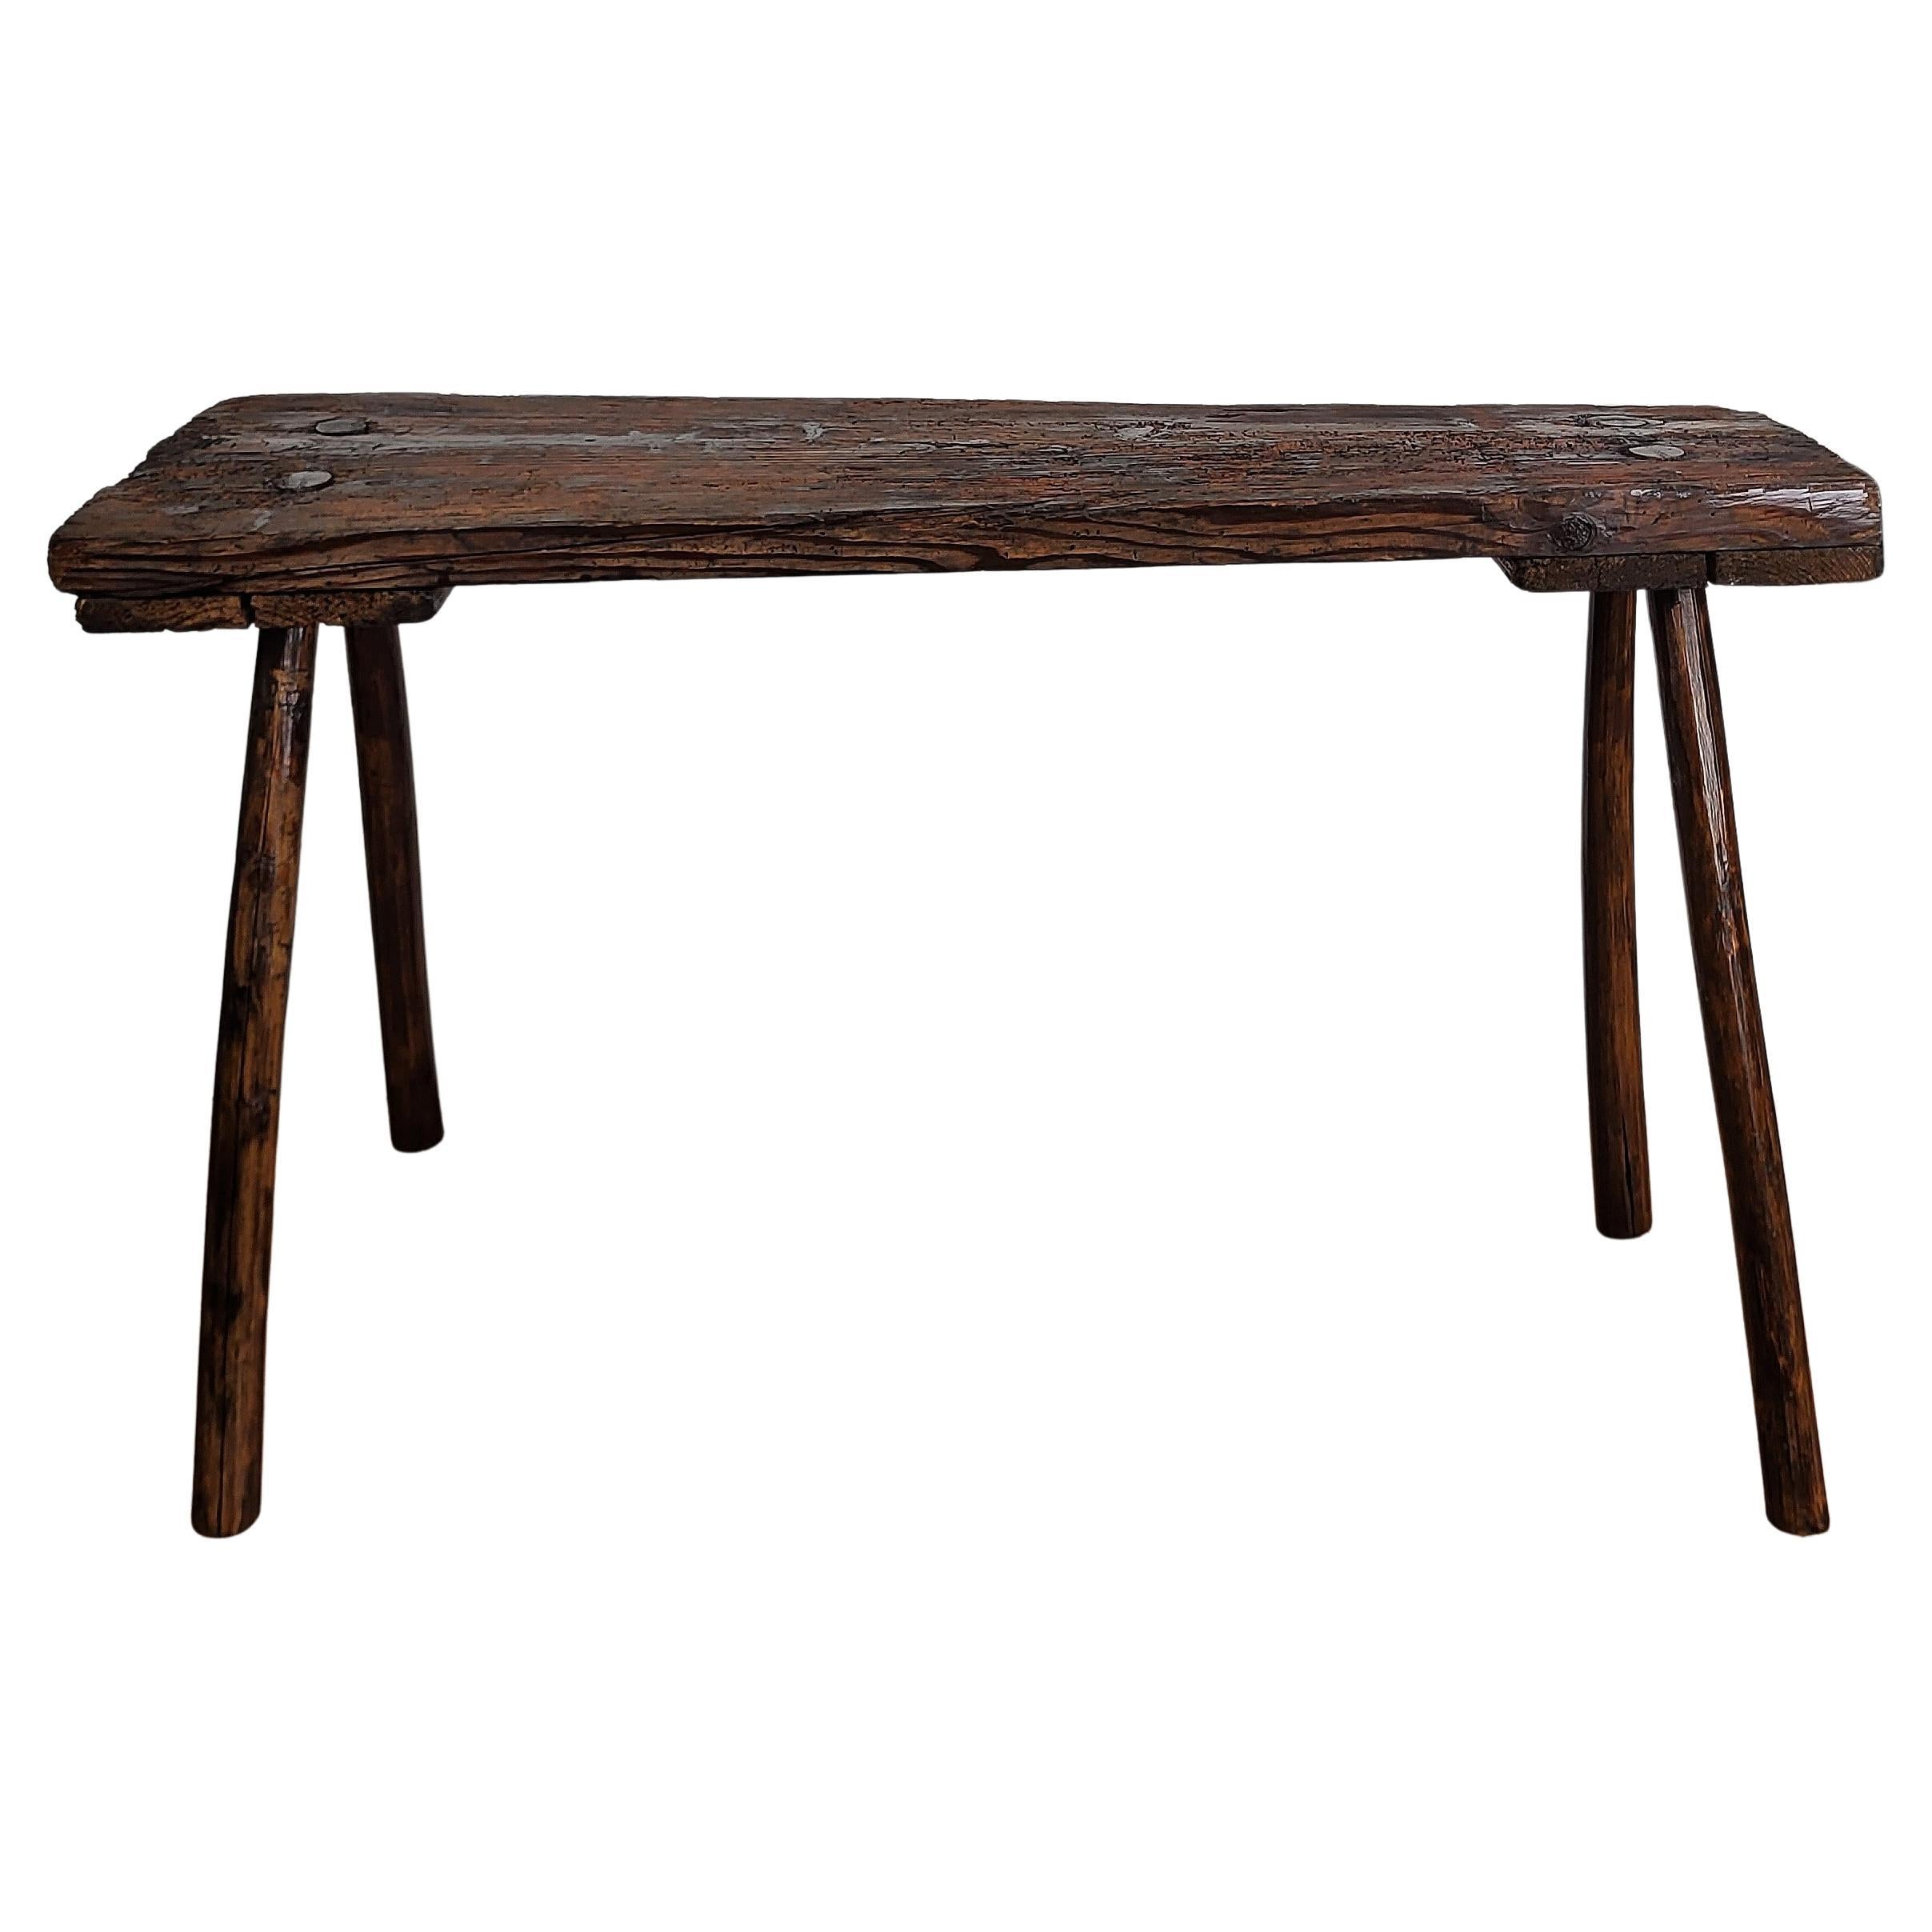 Primitive Rustic Minimal Italian Wooden Side Table Bench Stool For Sale